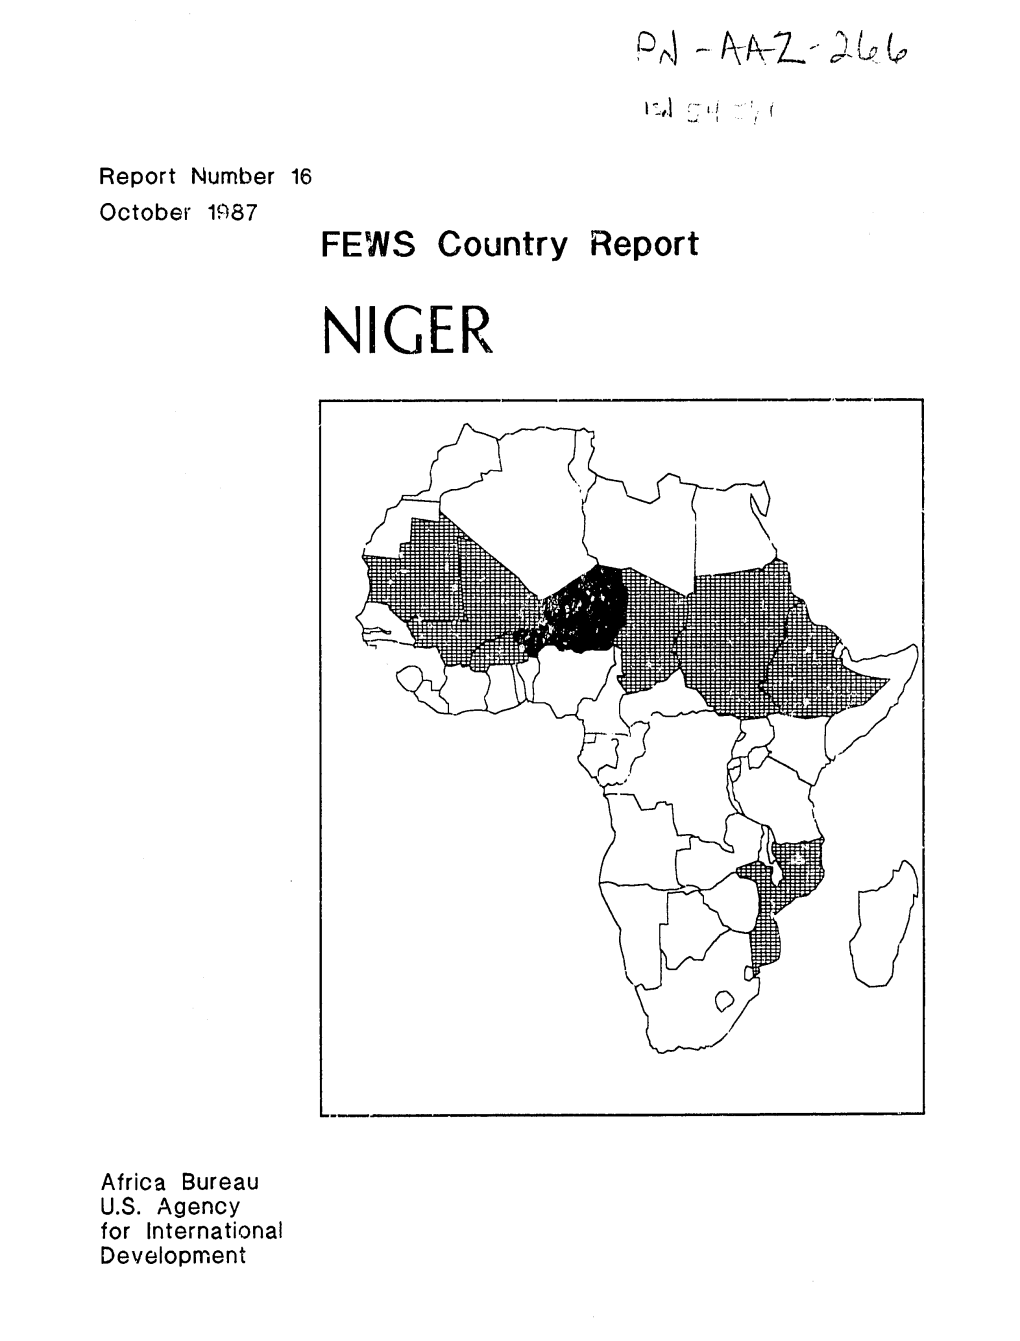 FEWS Country Report NIGER